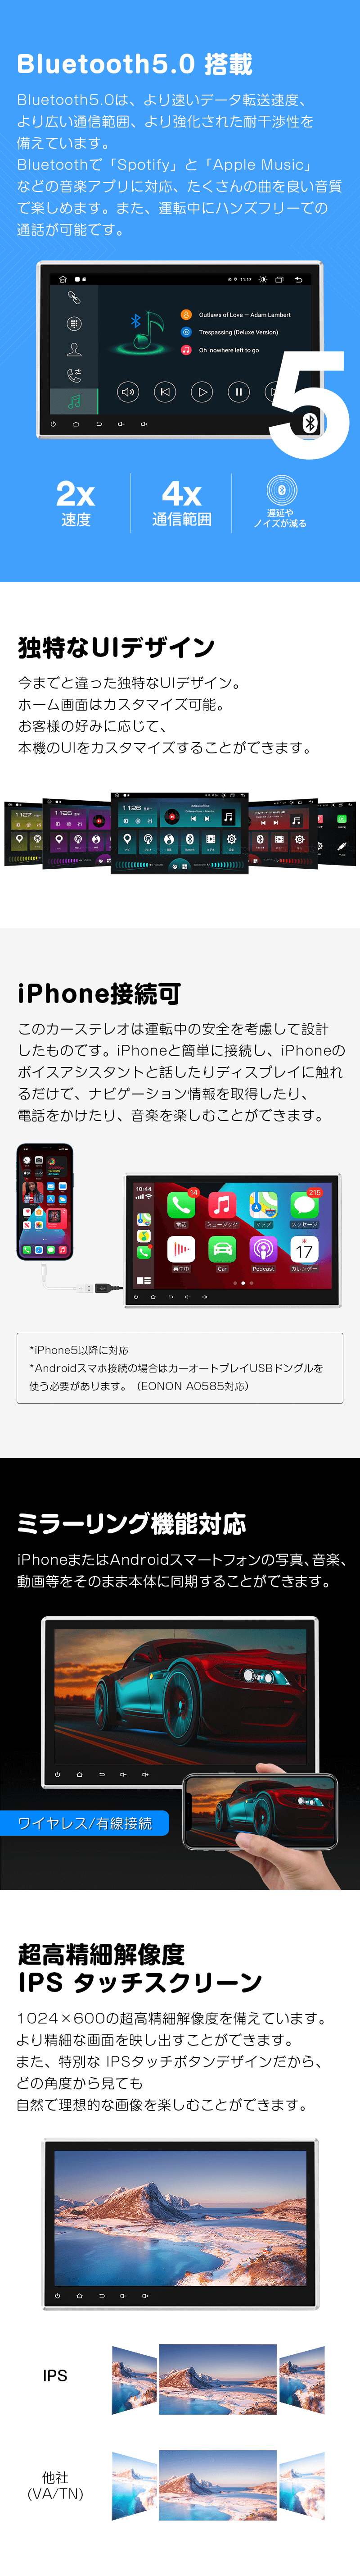 Android搭載